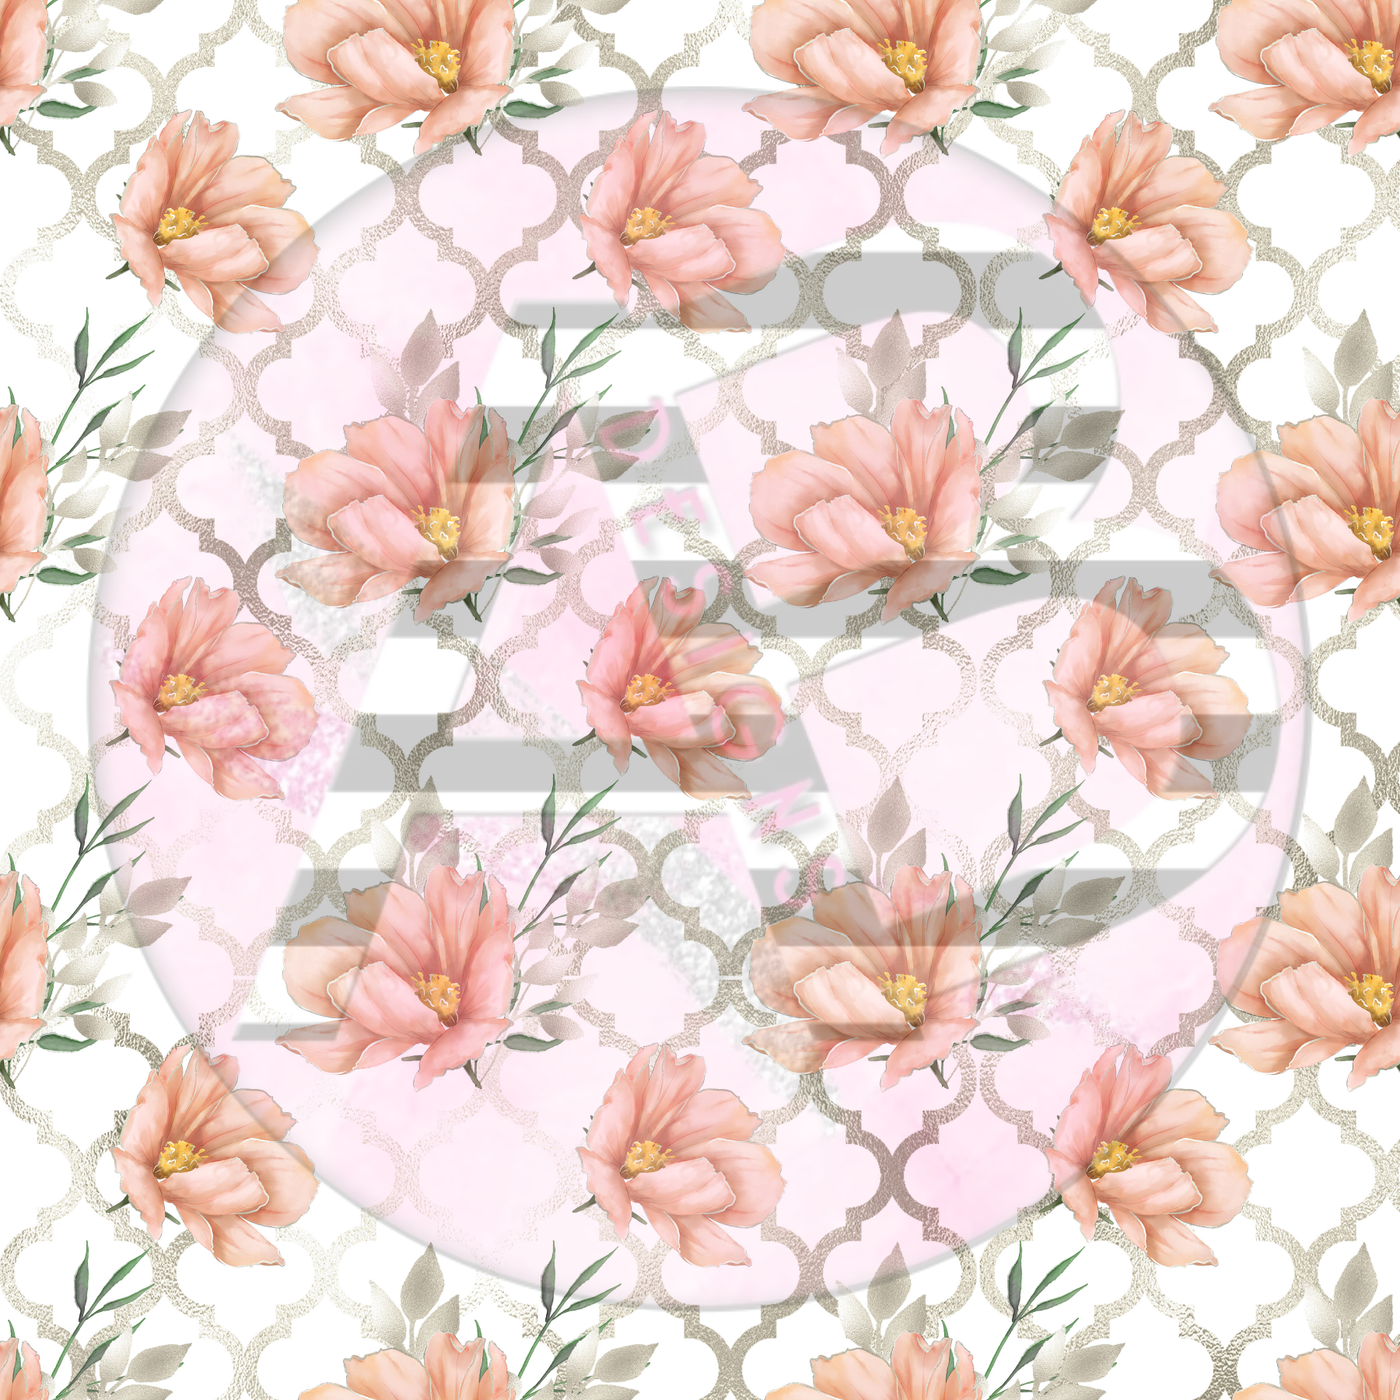 Adhesive Patterned Vinyl - Blush and Gold Floral 12